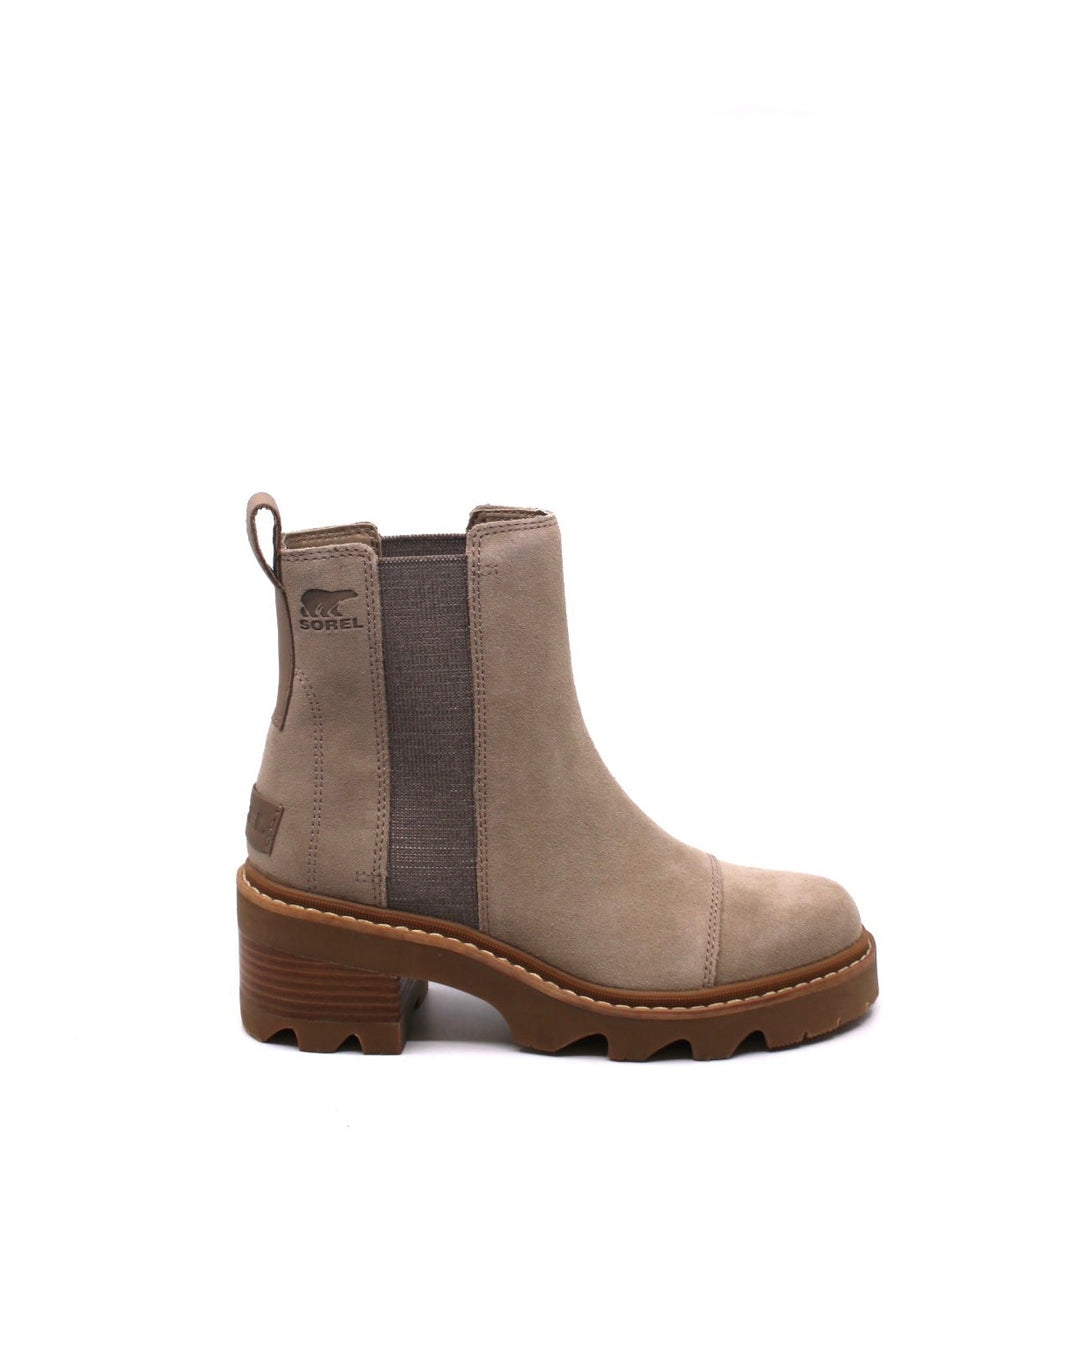 Sorel Joan Now Chelsea Omega Taupe/Gum - Dear Lucy